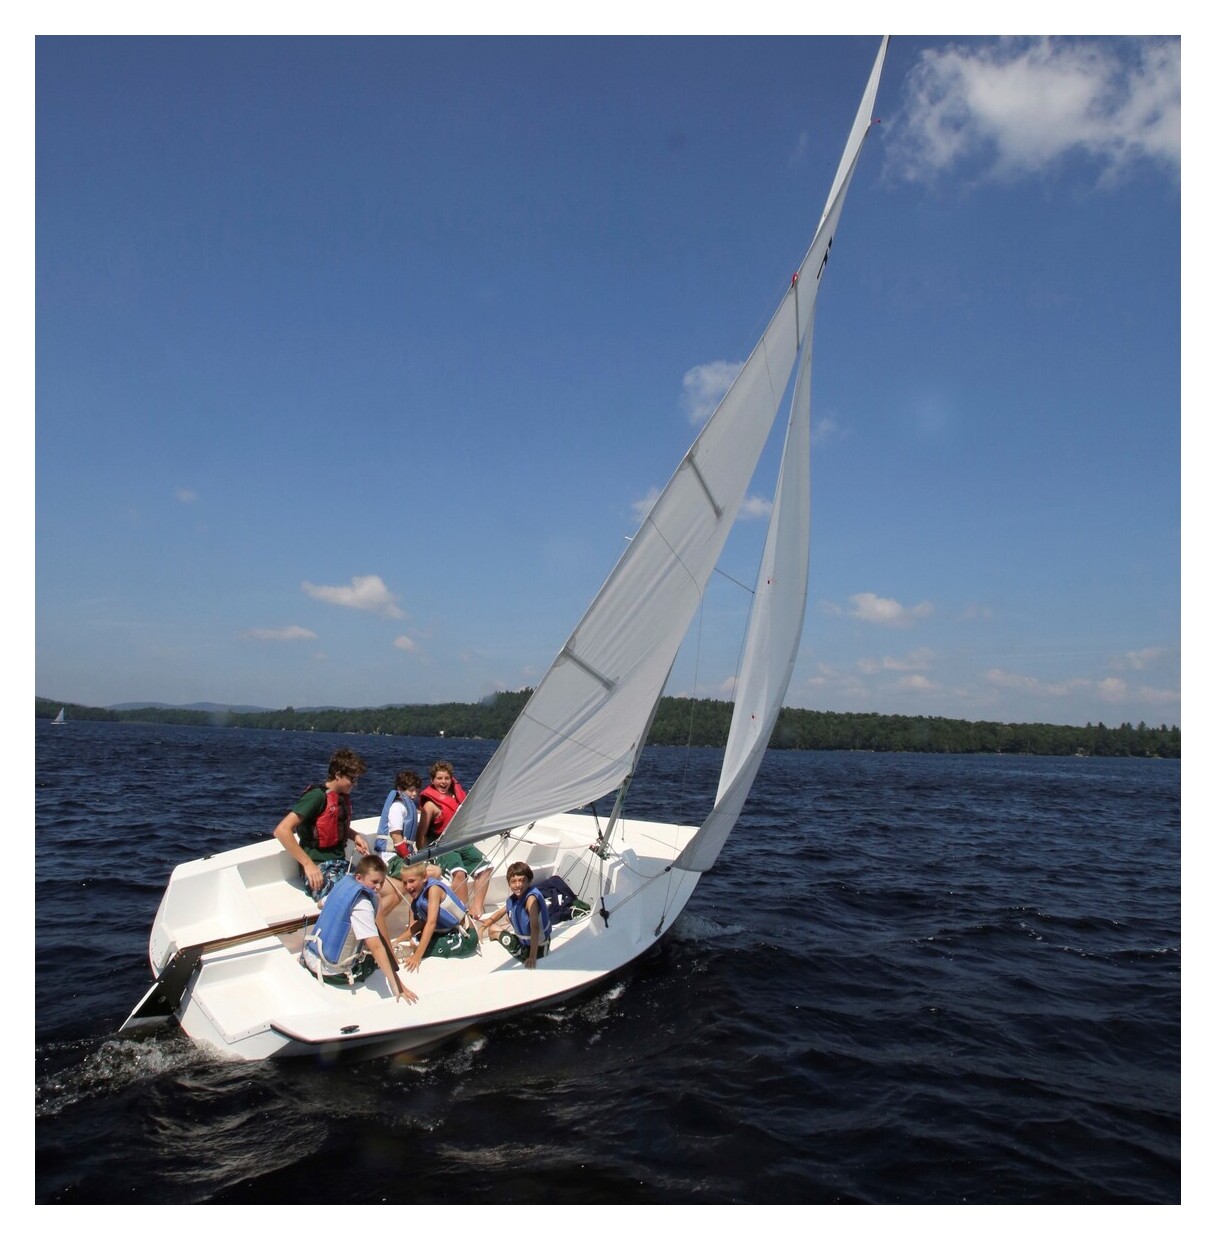 Campers sailing on Raquette Lake